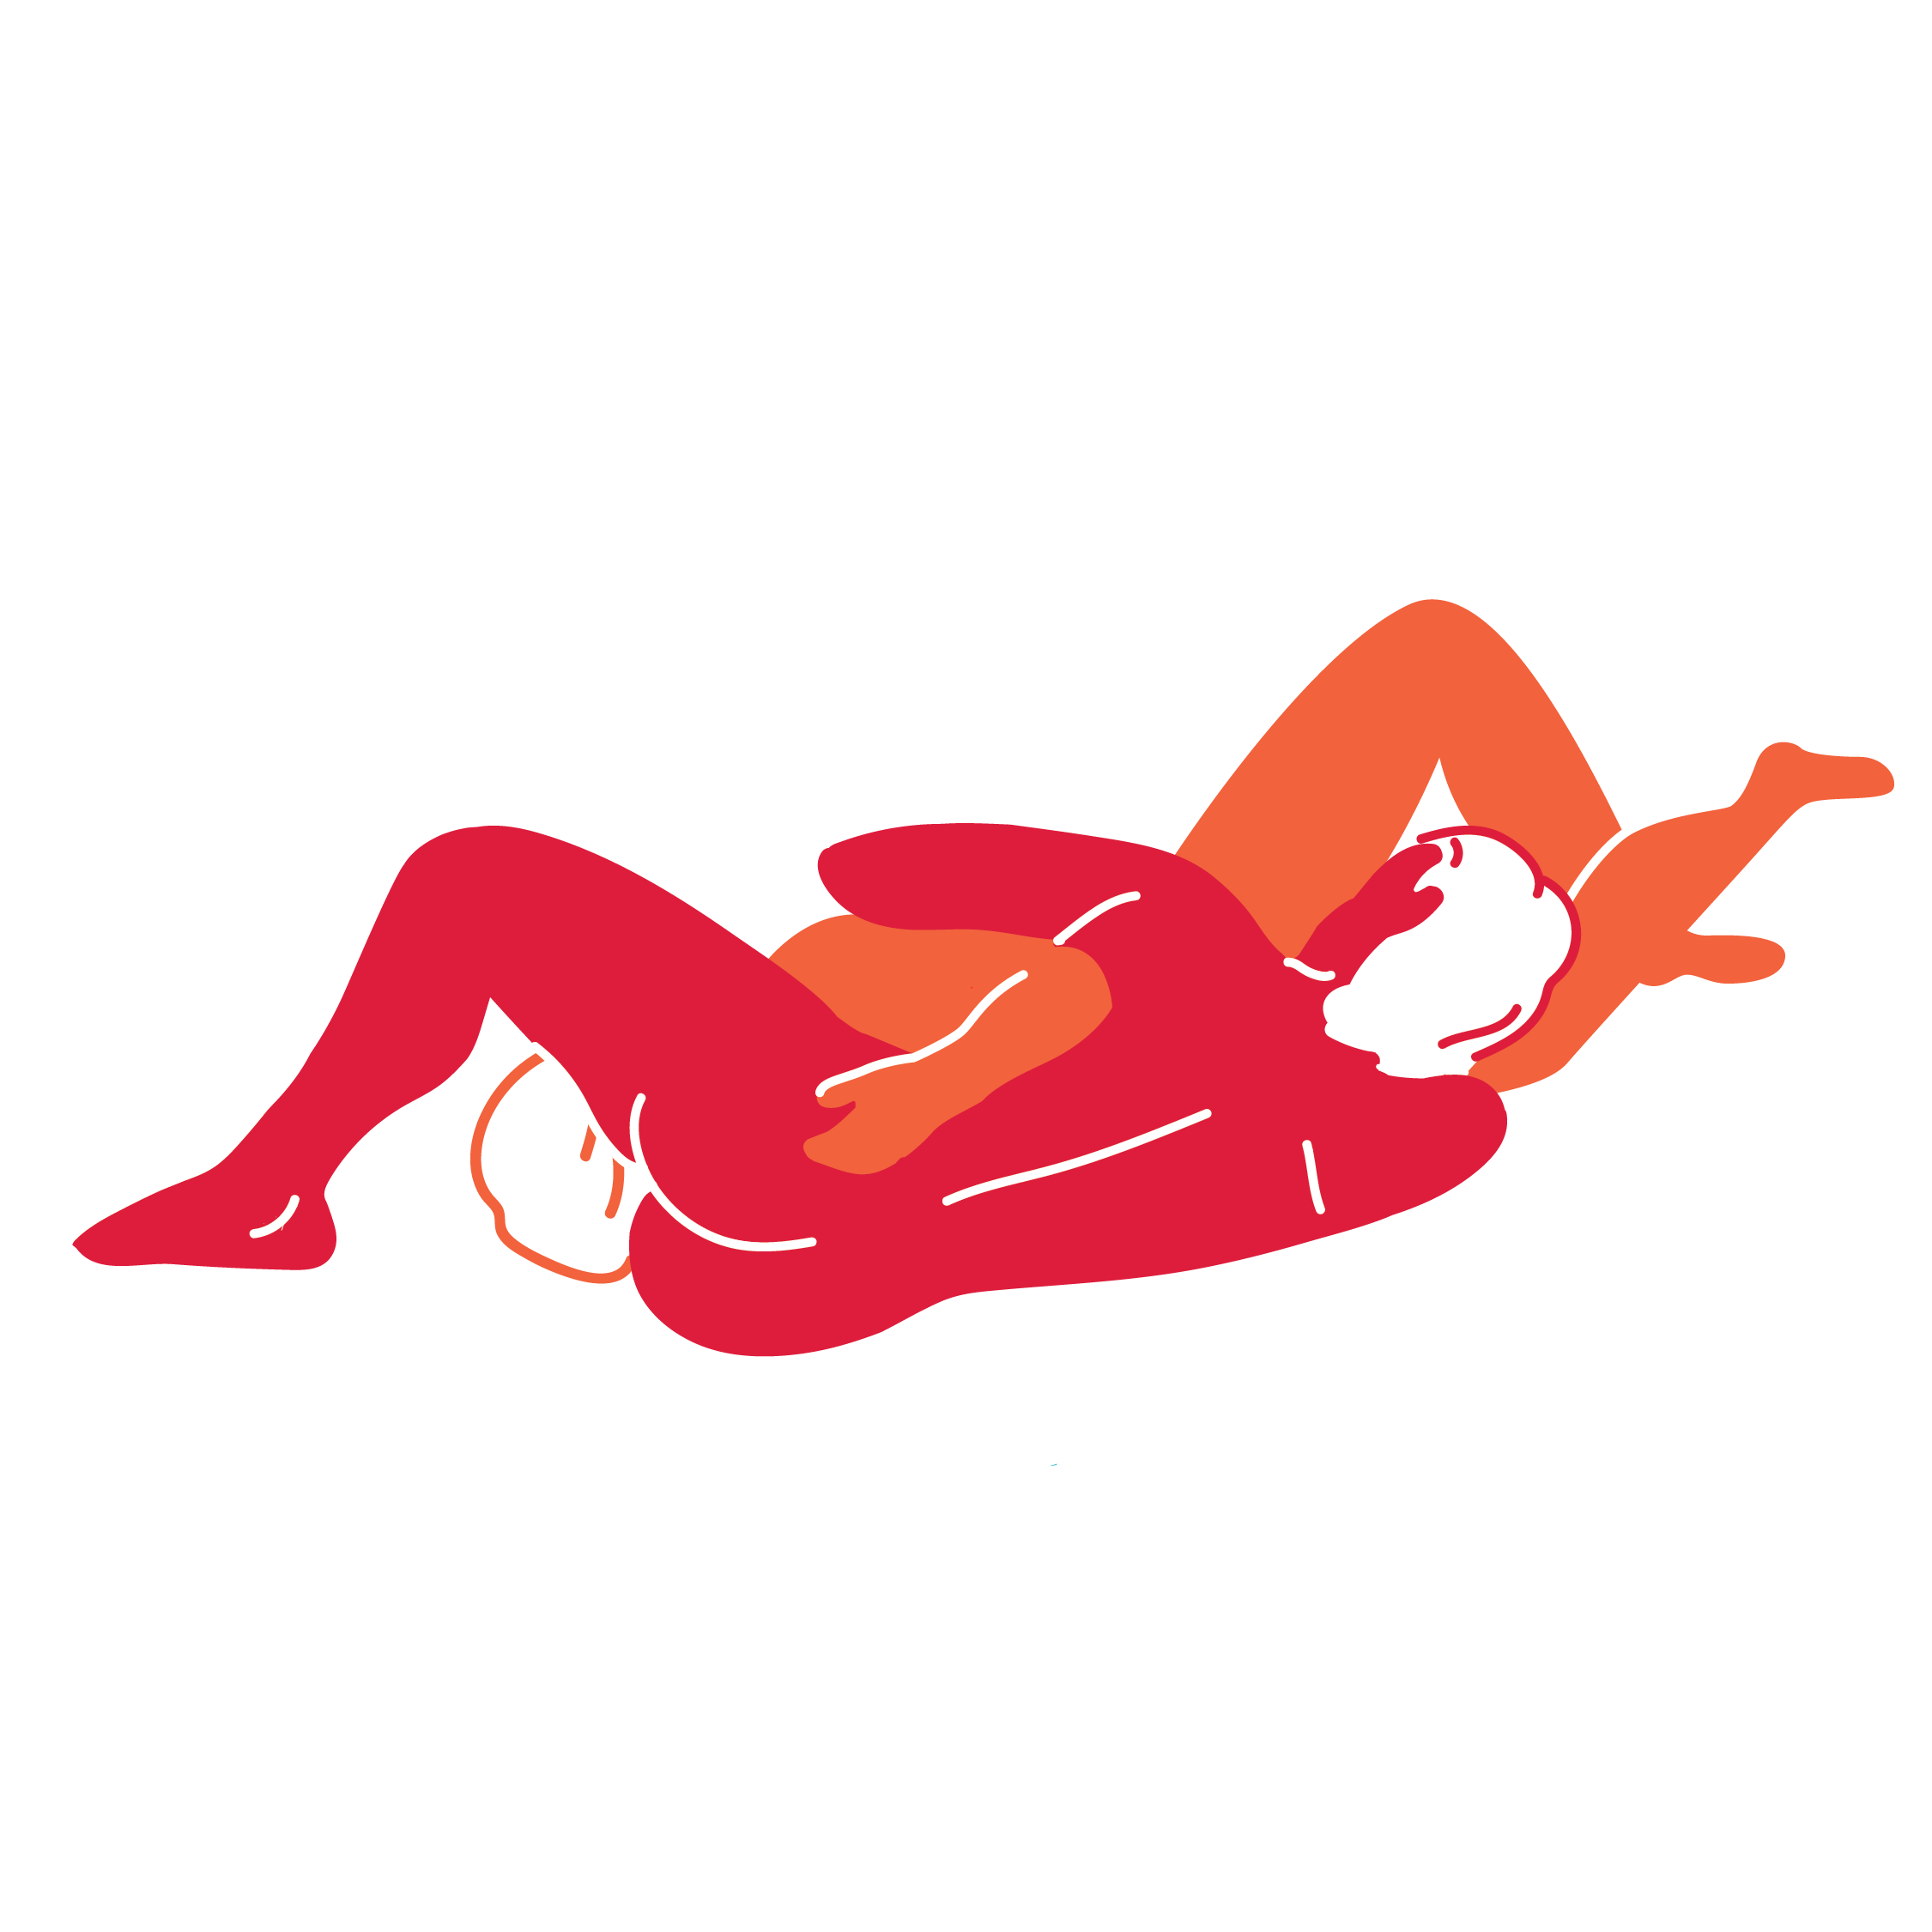 20 Most Romantic Sex Positions For Couples, Per Experts